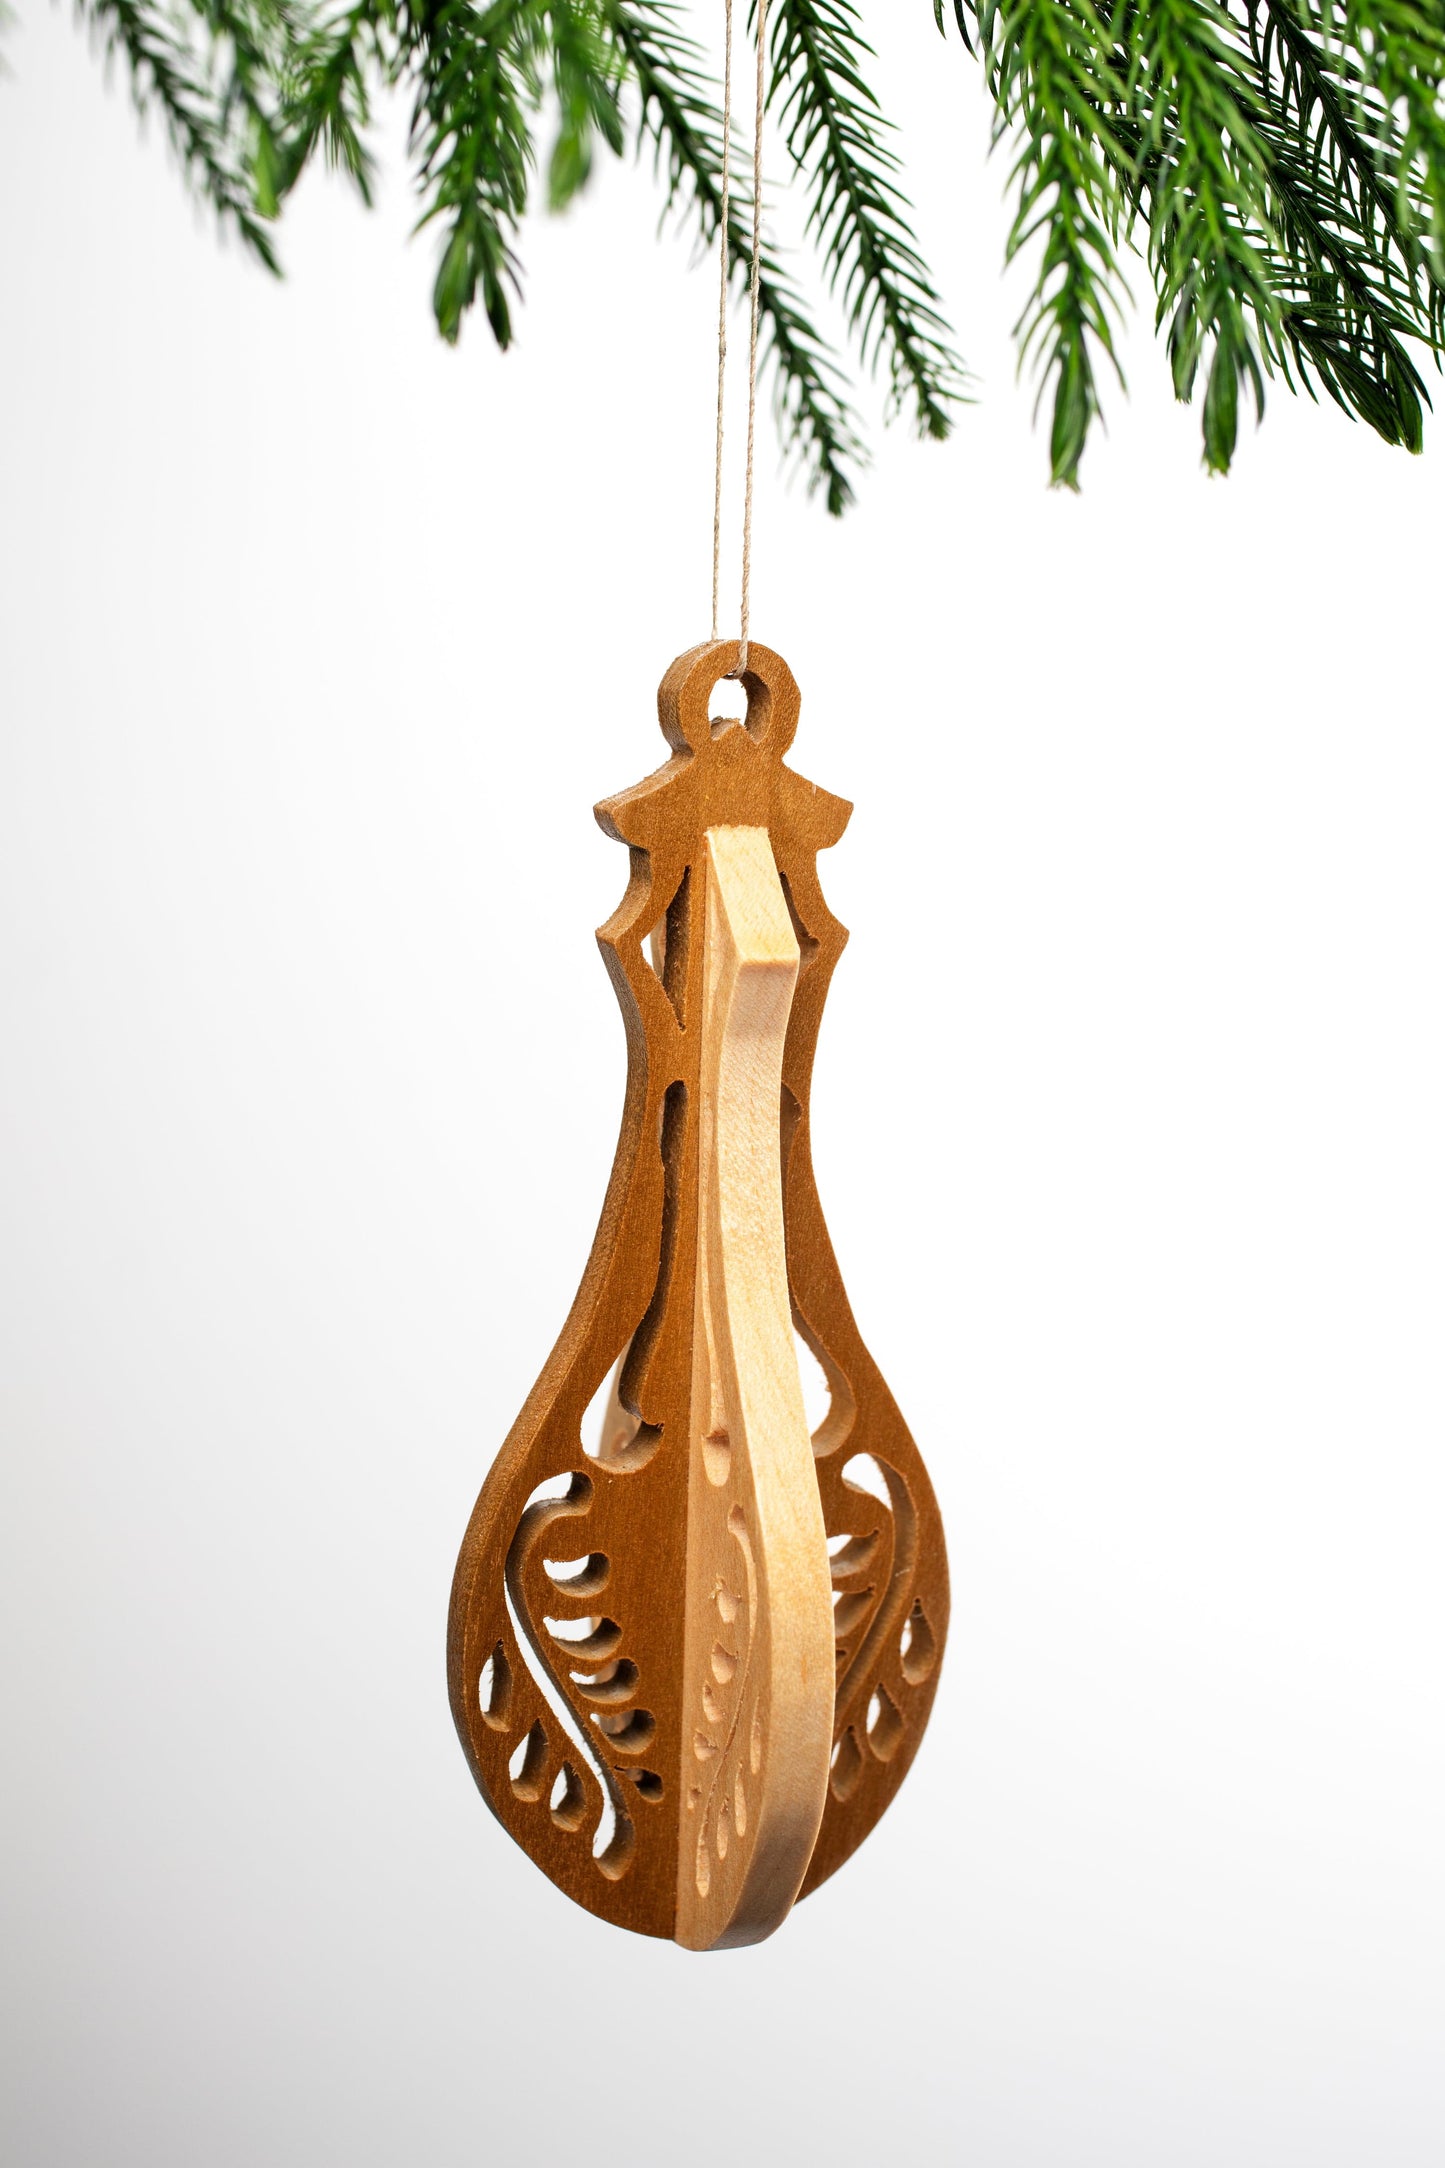 The Carpentry Shop Co. Oak Ornament Solid Wood Holiday Ornaments